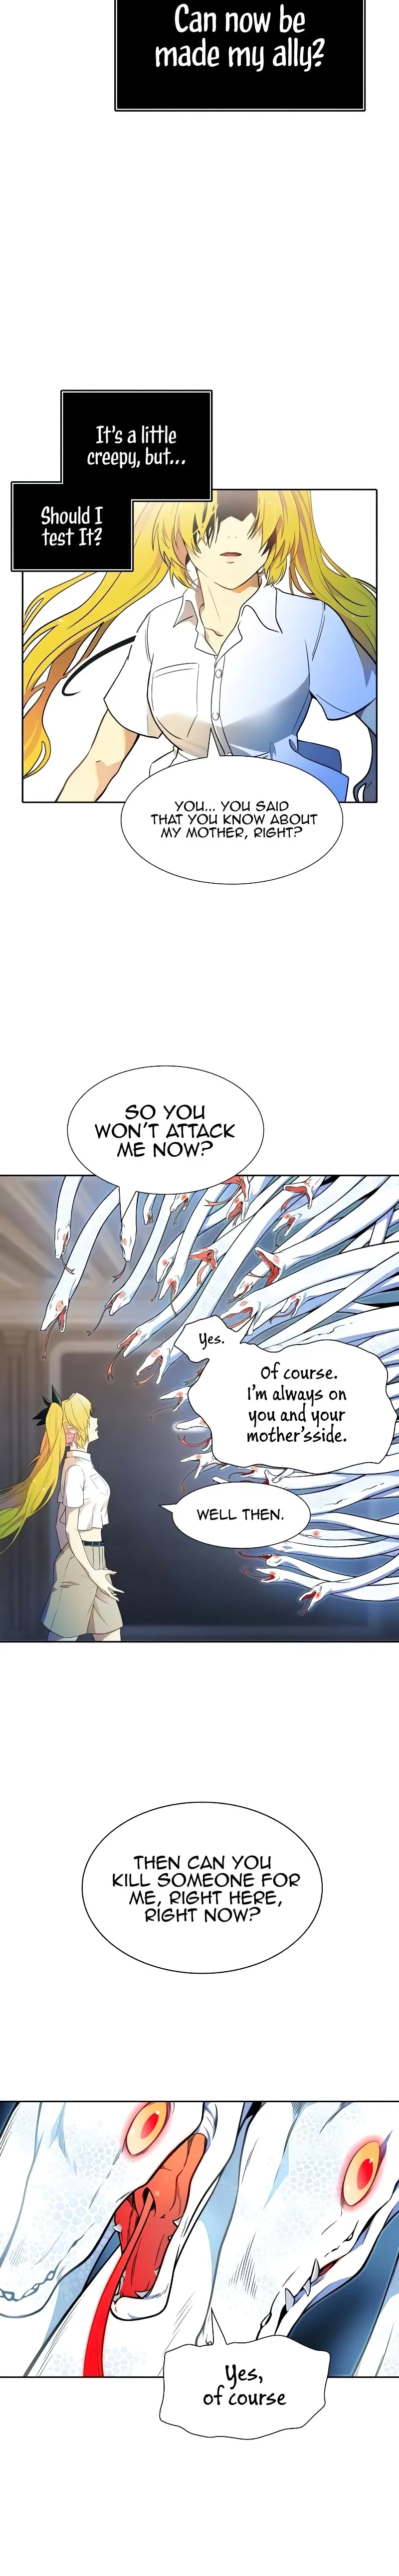 Tower Of God Chapter 560 Read Tower Of God Chapter 560 - Manganelo